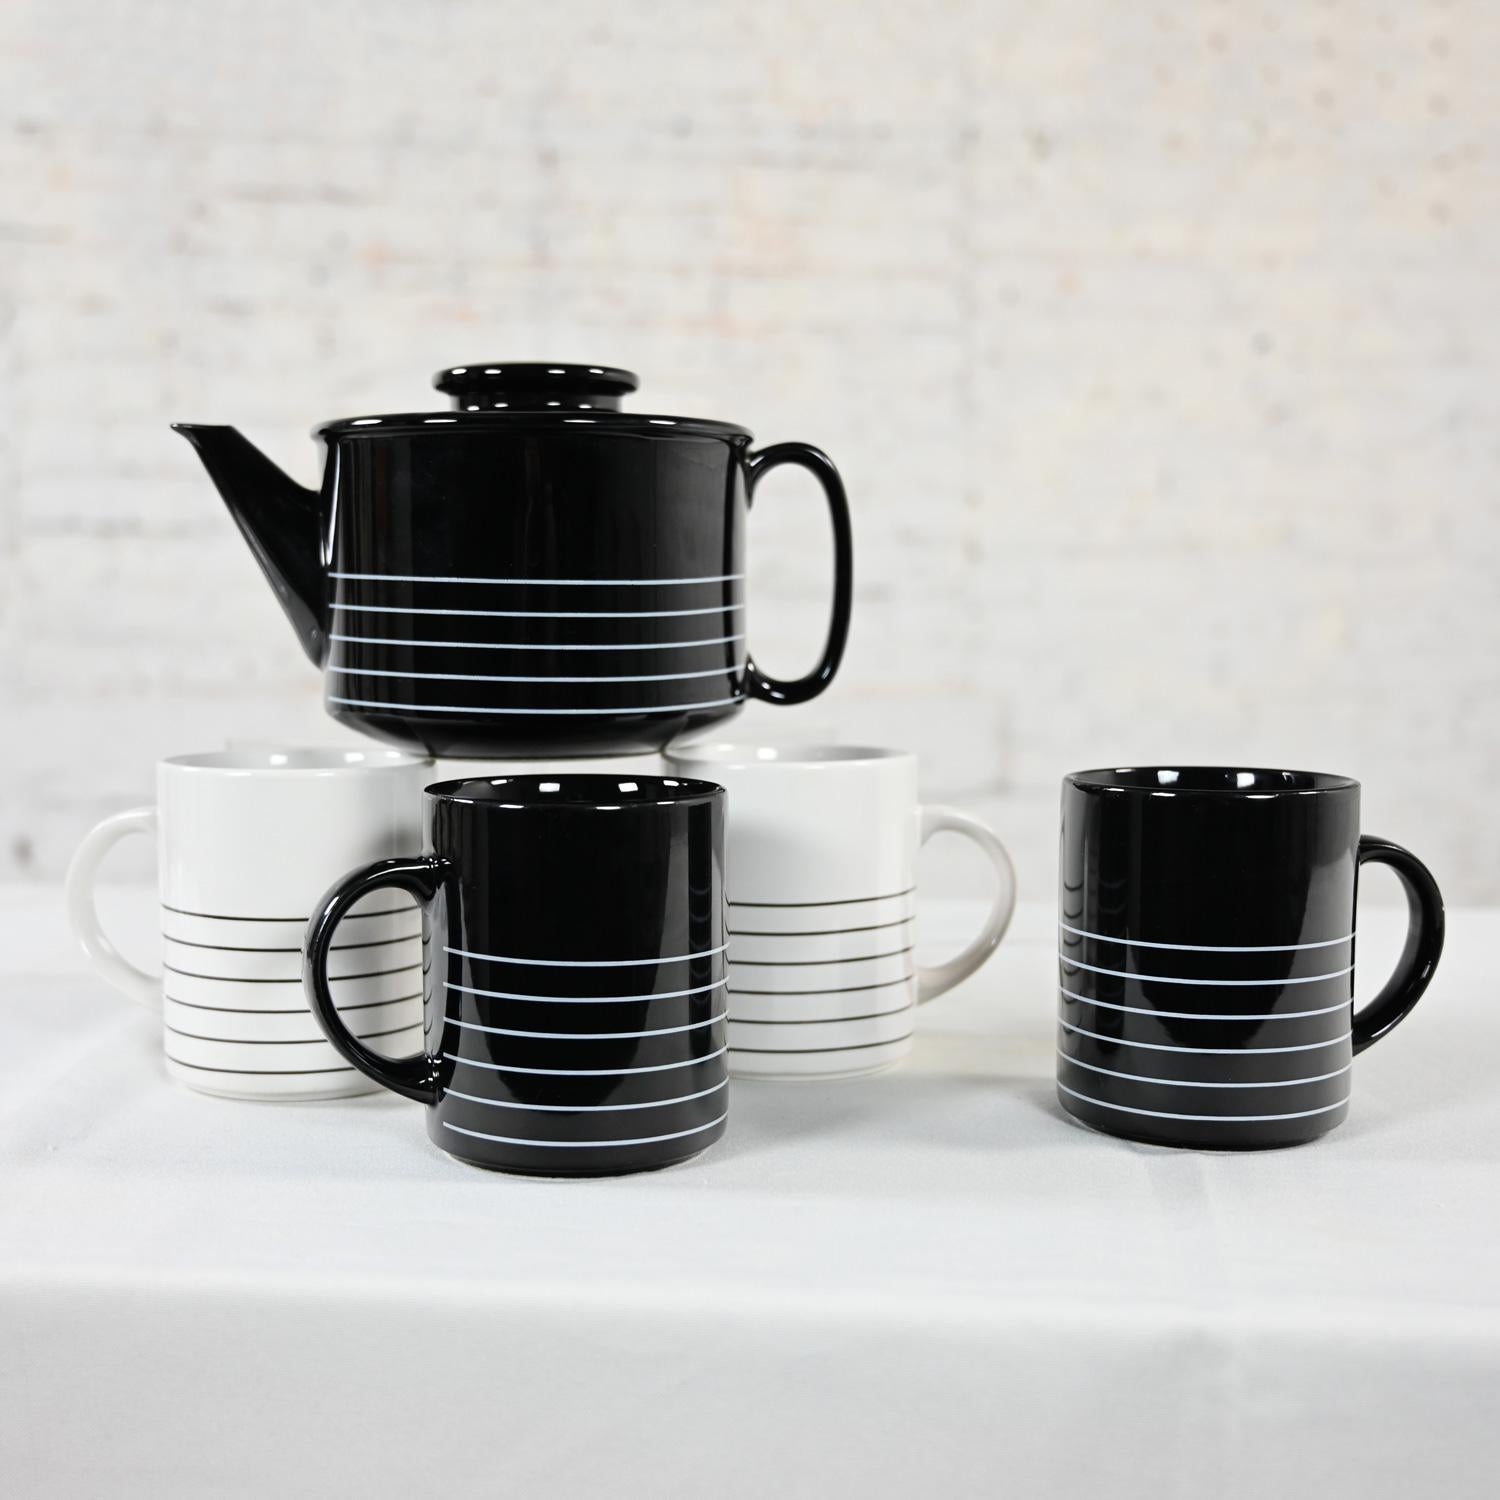 1982 Modern Copco Black & White Glazed Ceramic Teapot & 4 Mugs by Sam Lebowitz  In Good Condition For Sale In Topeka, KS